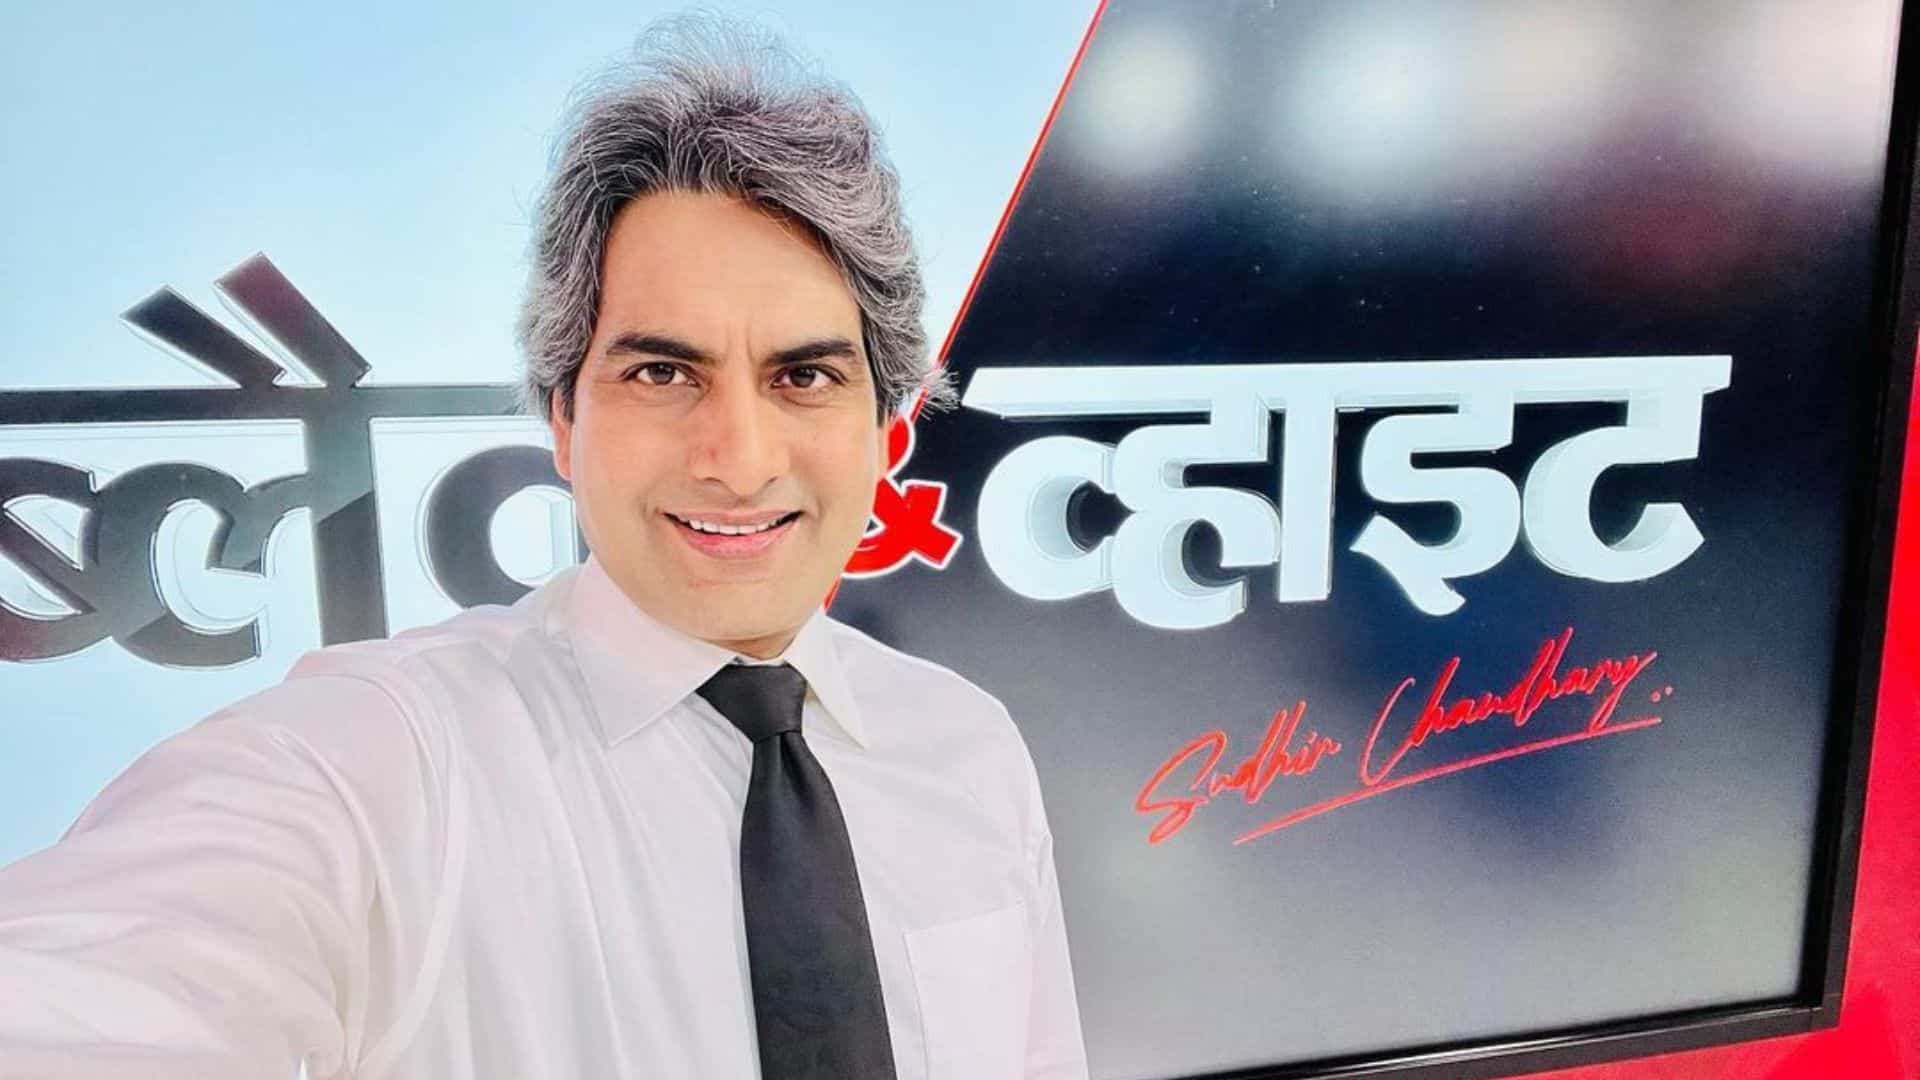 Sudhir Chaudhary Bio: Know All About The Journalist